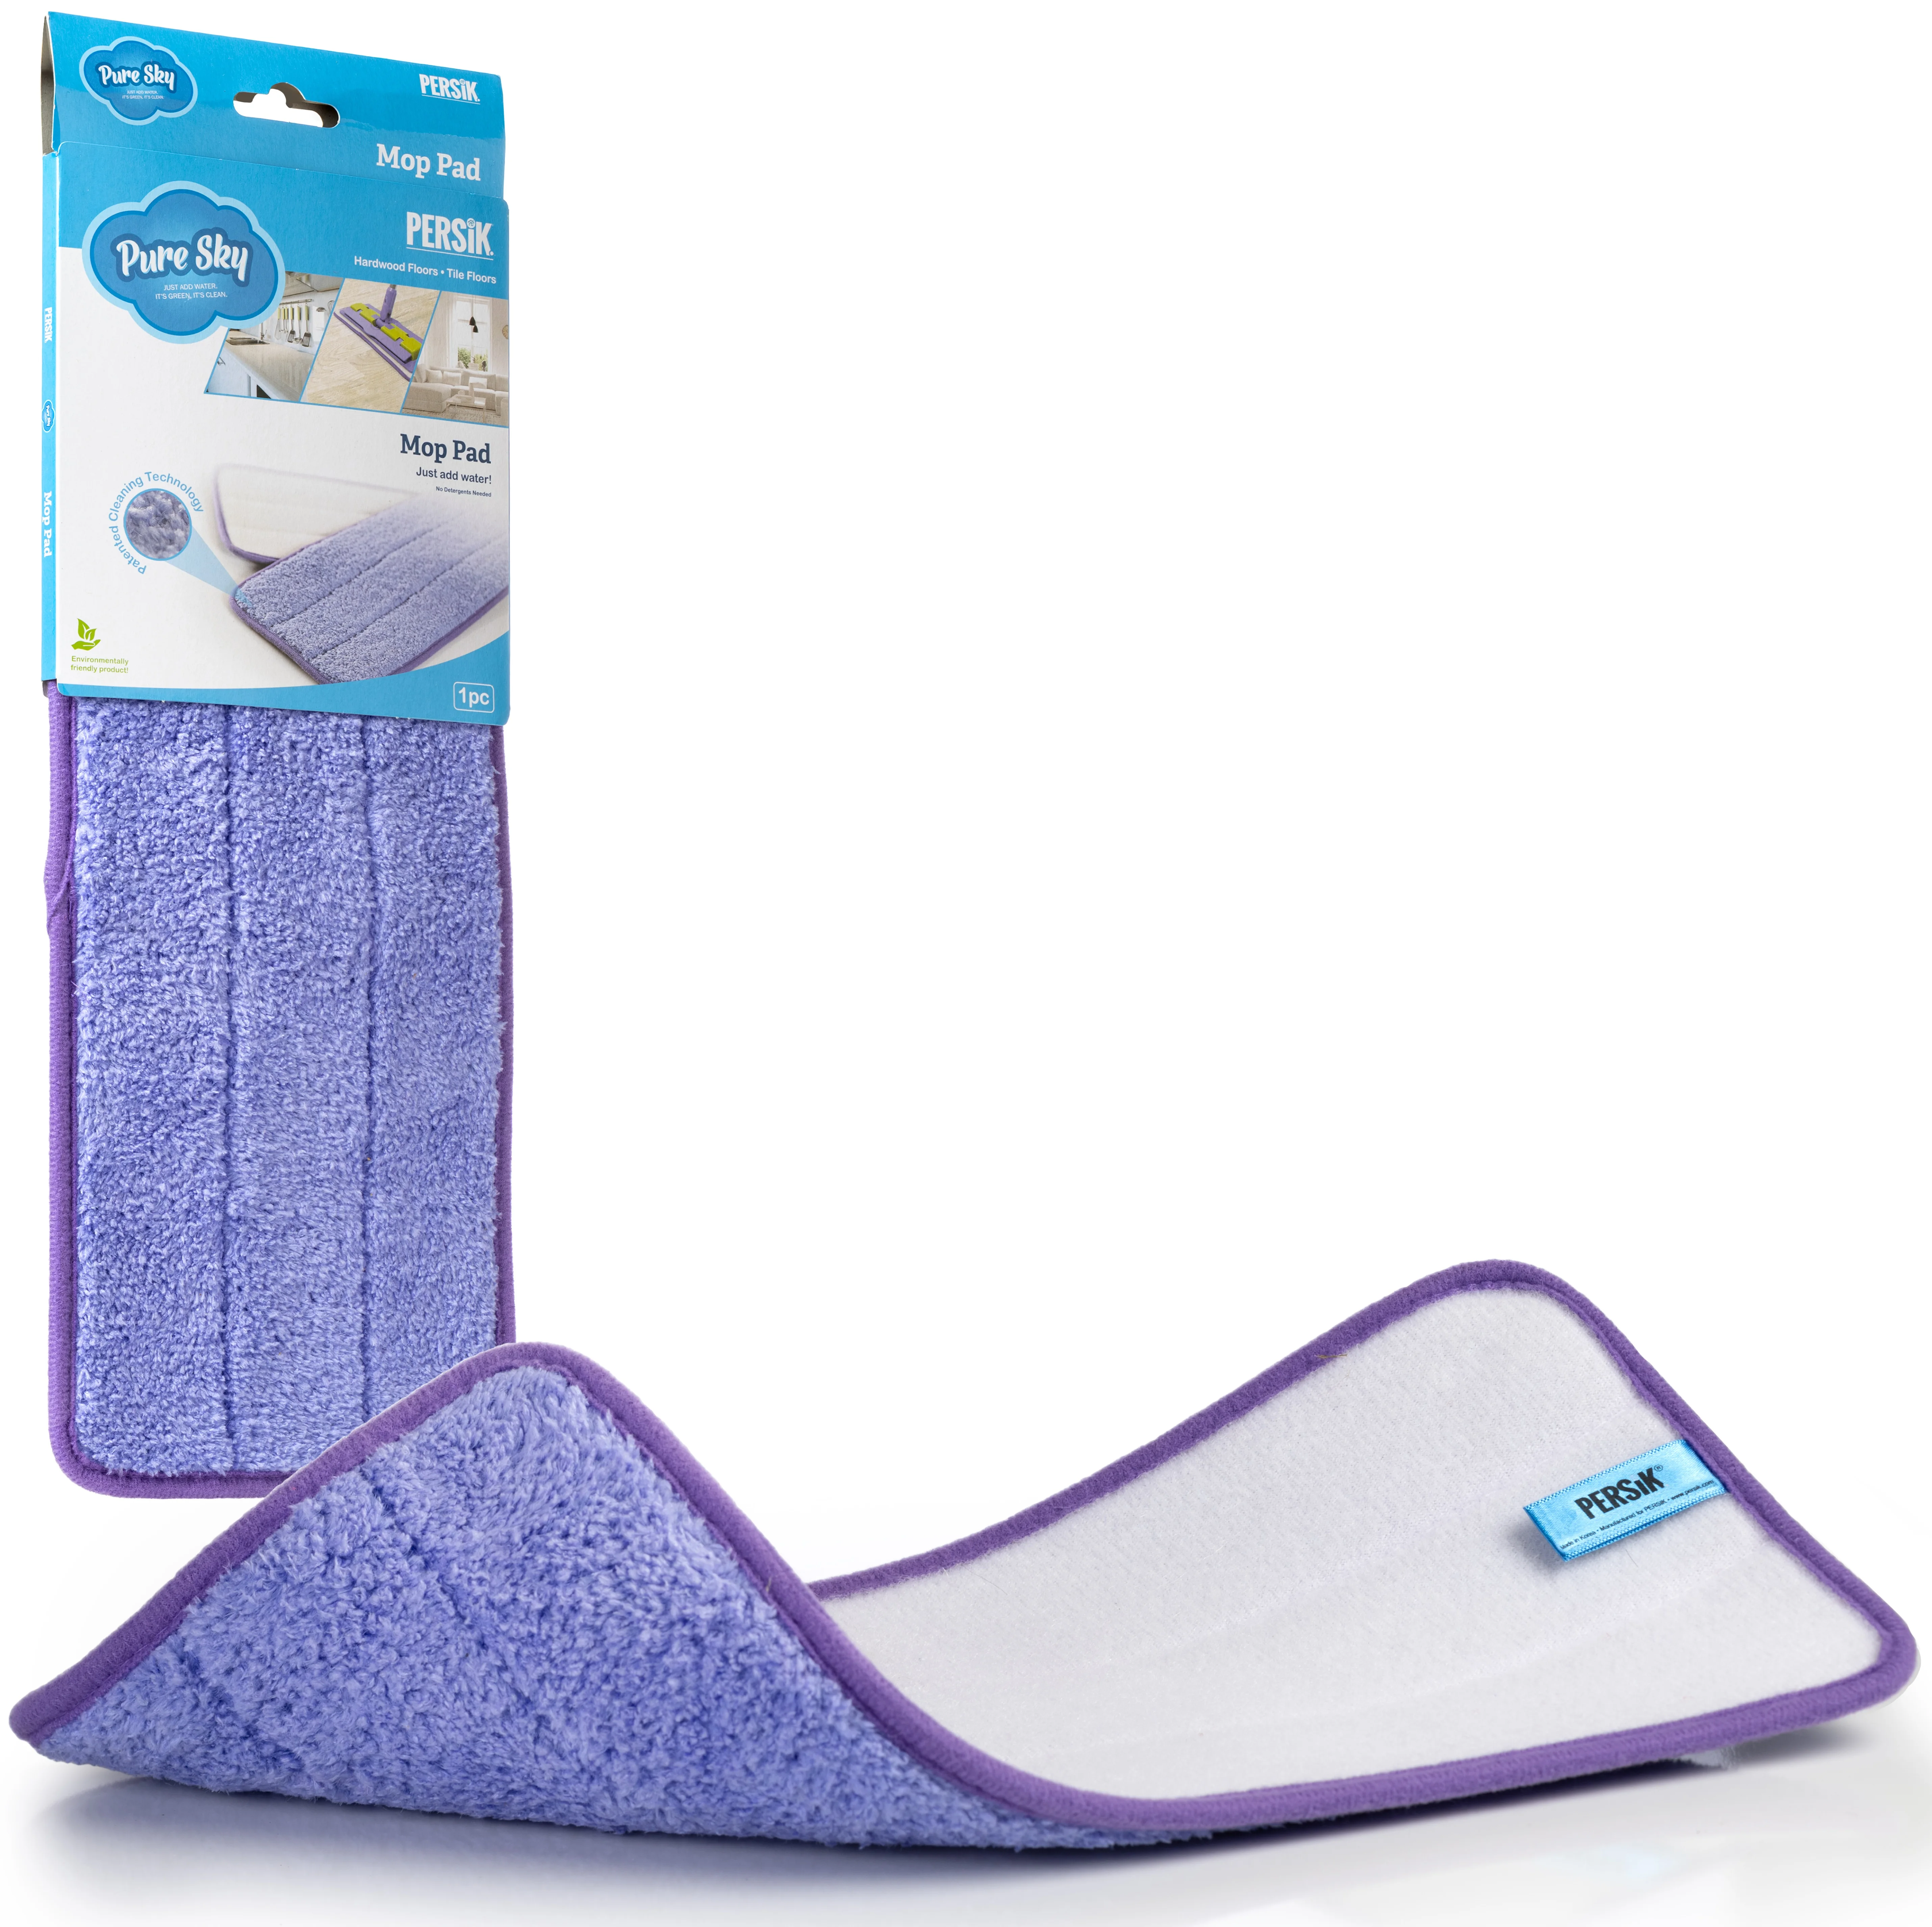 
Pure Sky Ultra Microfiber Deep Cleaning Mop Pad Just Add Water No Detergents Needed Super Absorbent 